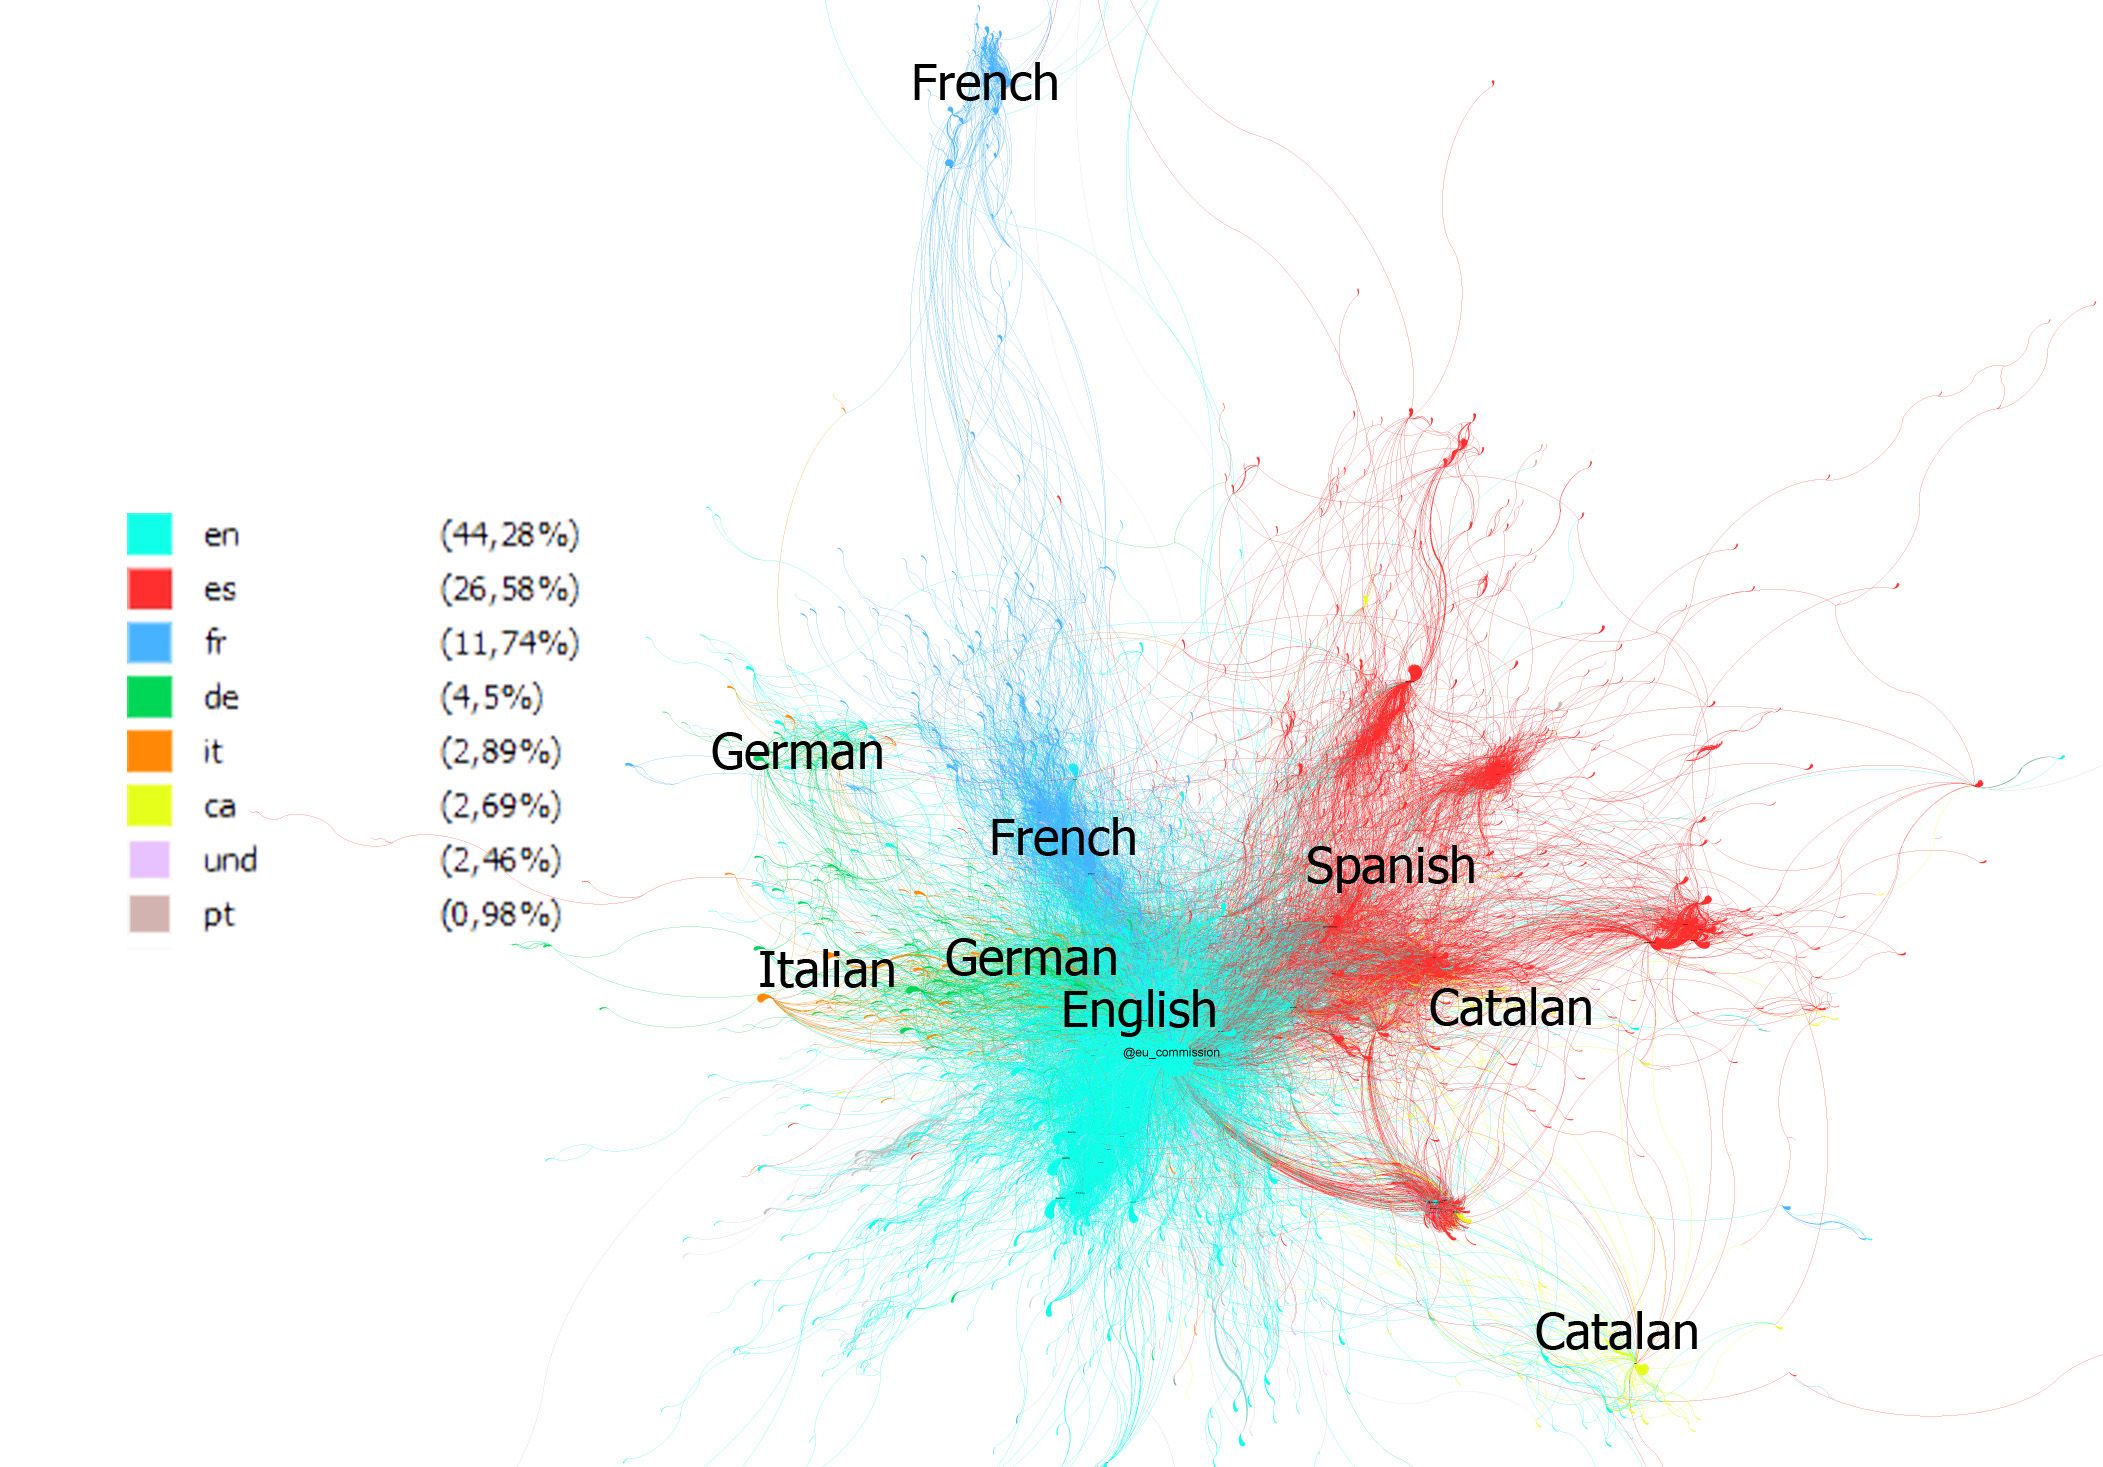 FIG. 3 GRAPH OF RTS BY LANGUAGE